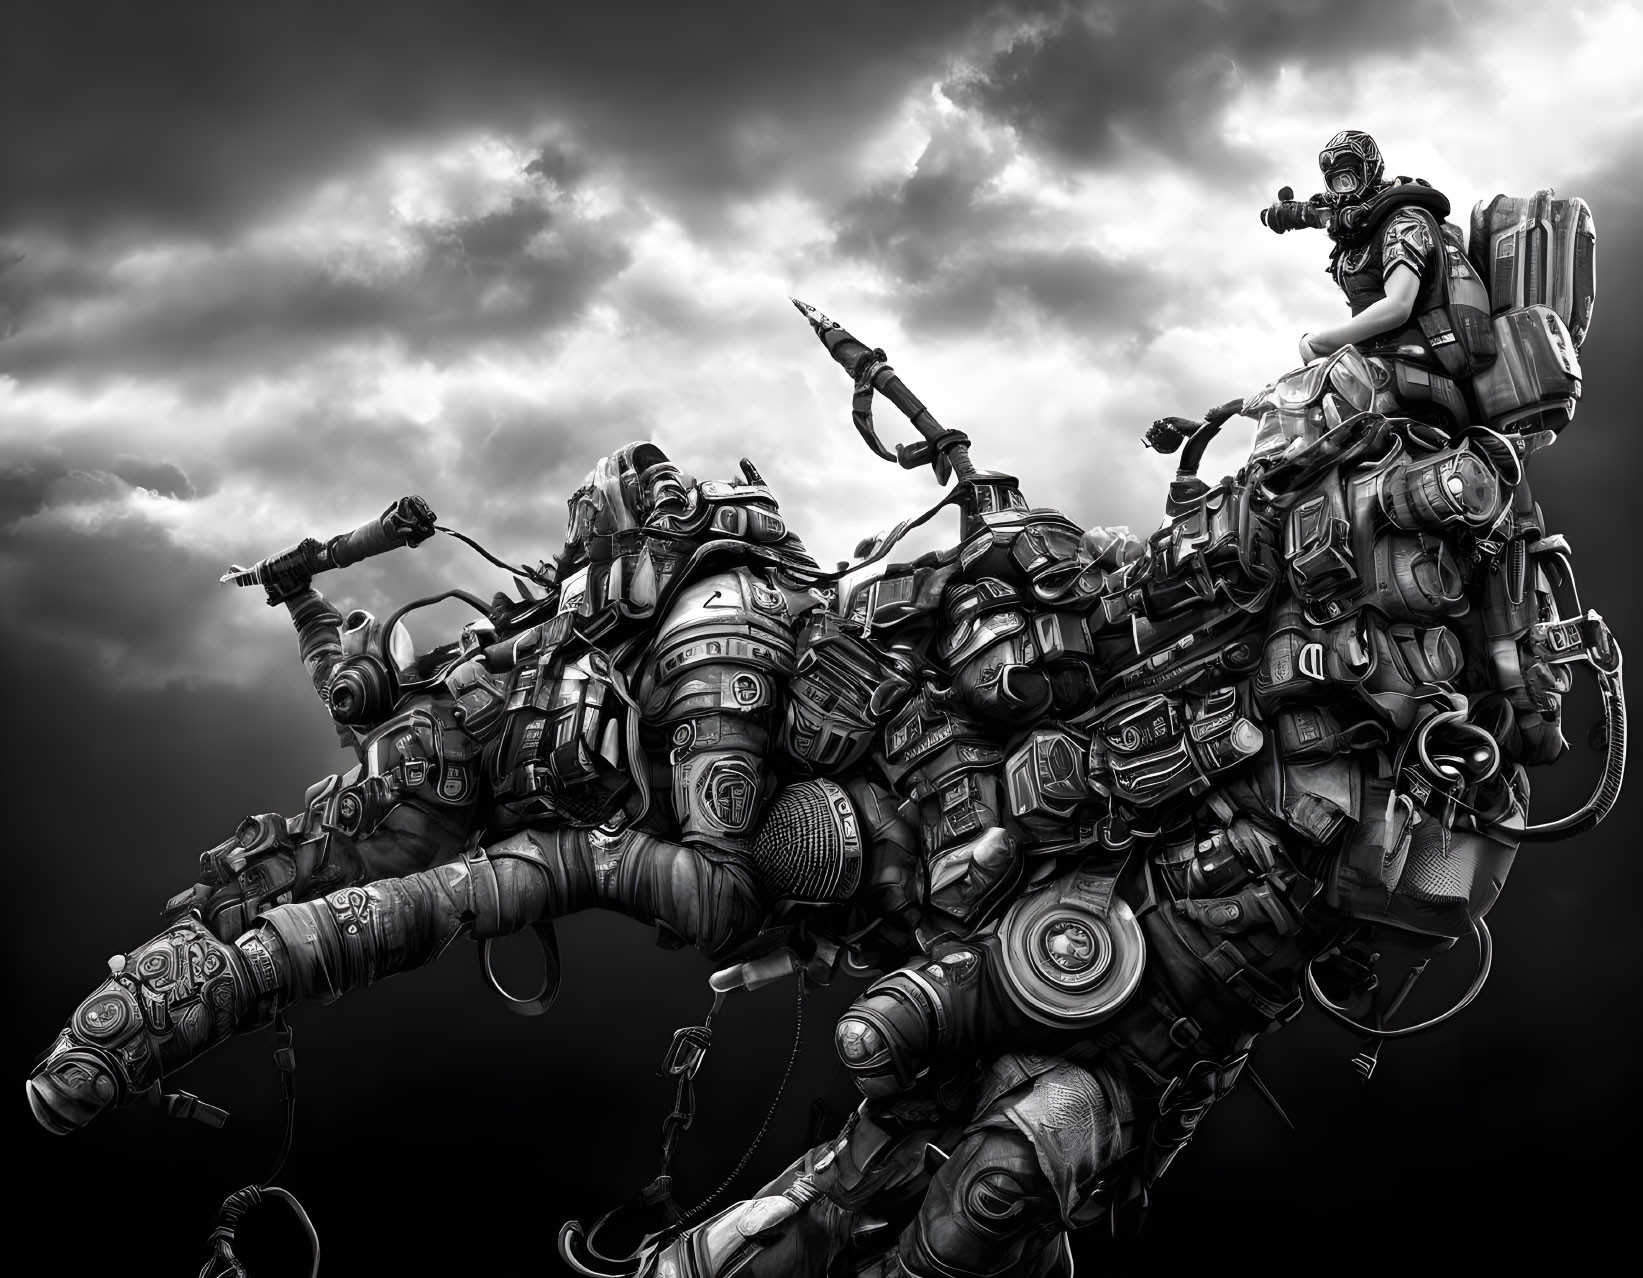 Futuristic armored person on mechanical animal robot under stormy sky